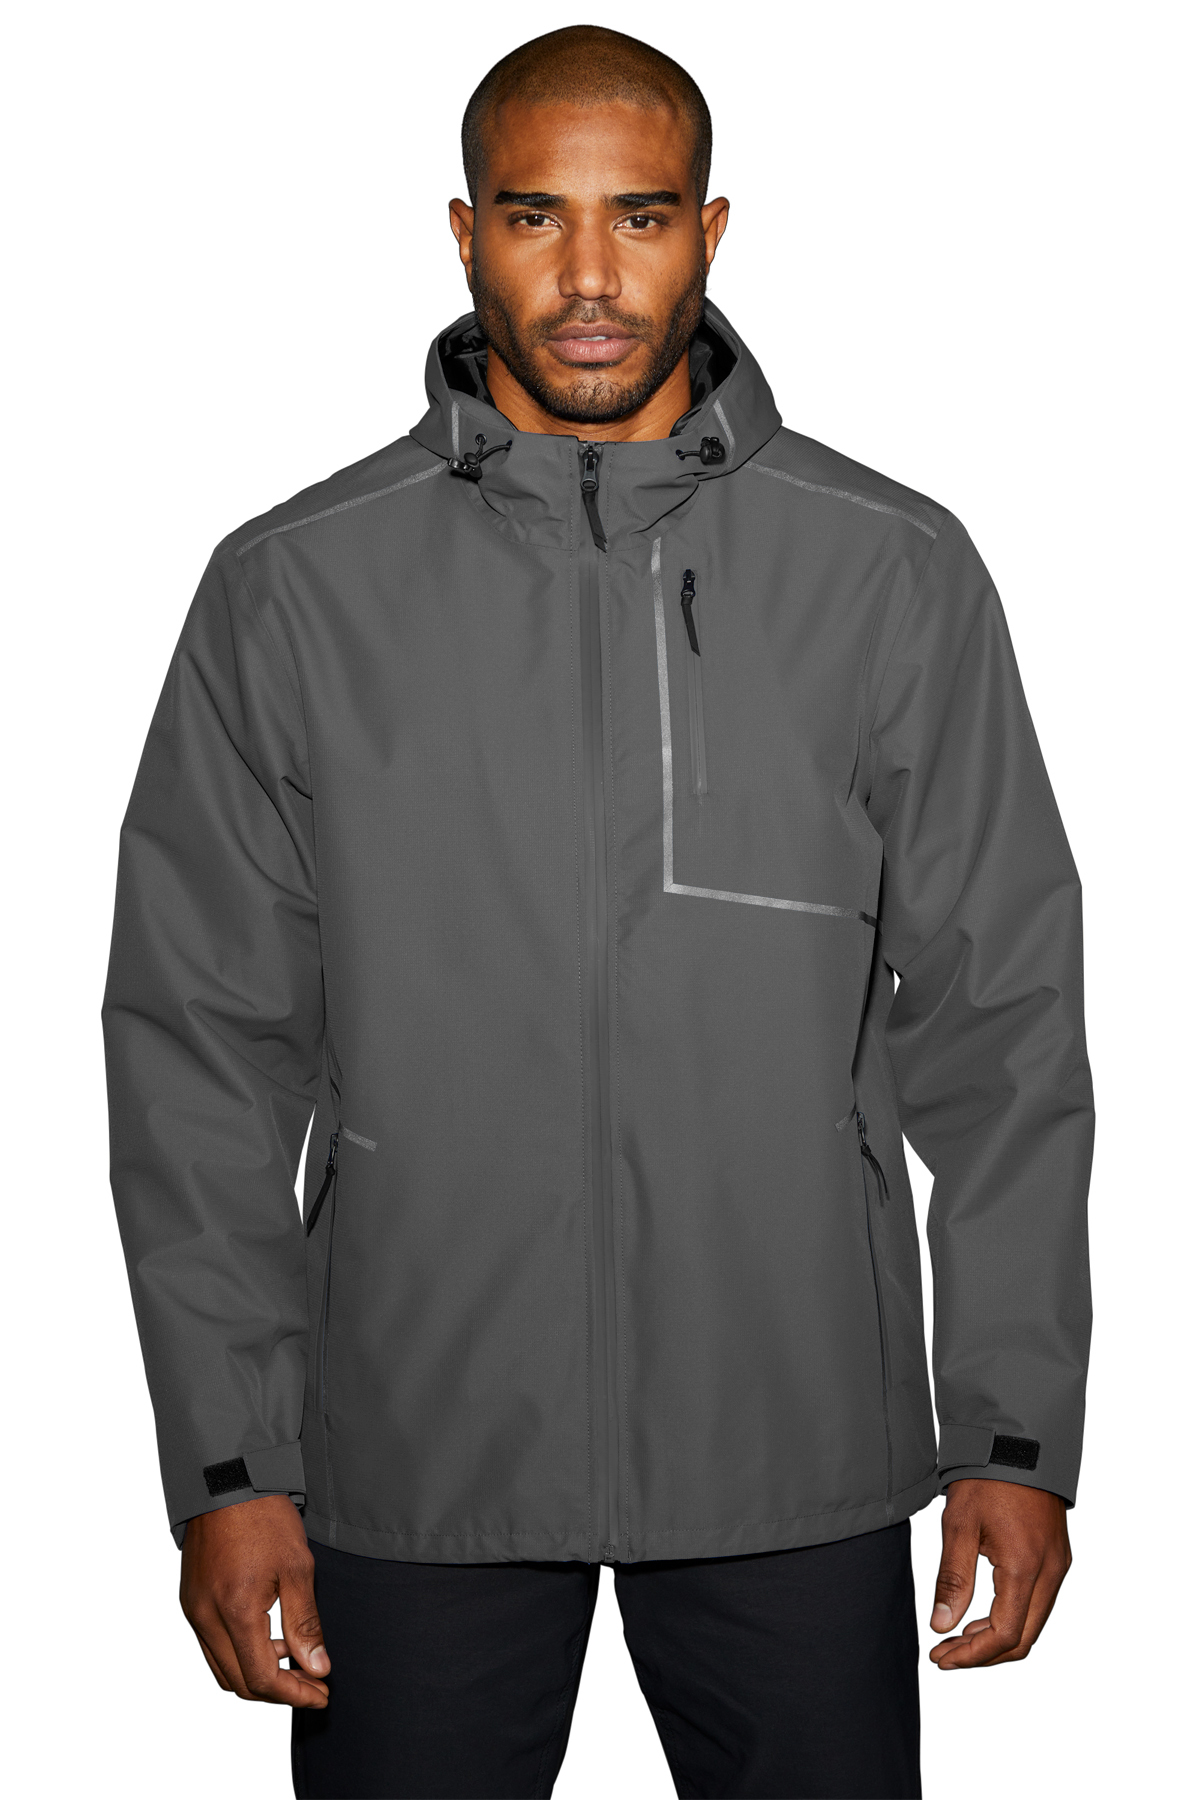 Port Authority Collective Tech Outer Shell Jacket | Product | Company ...